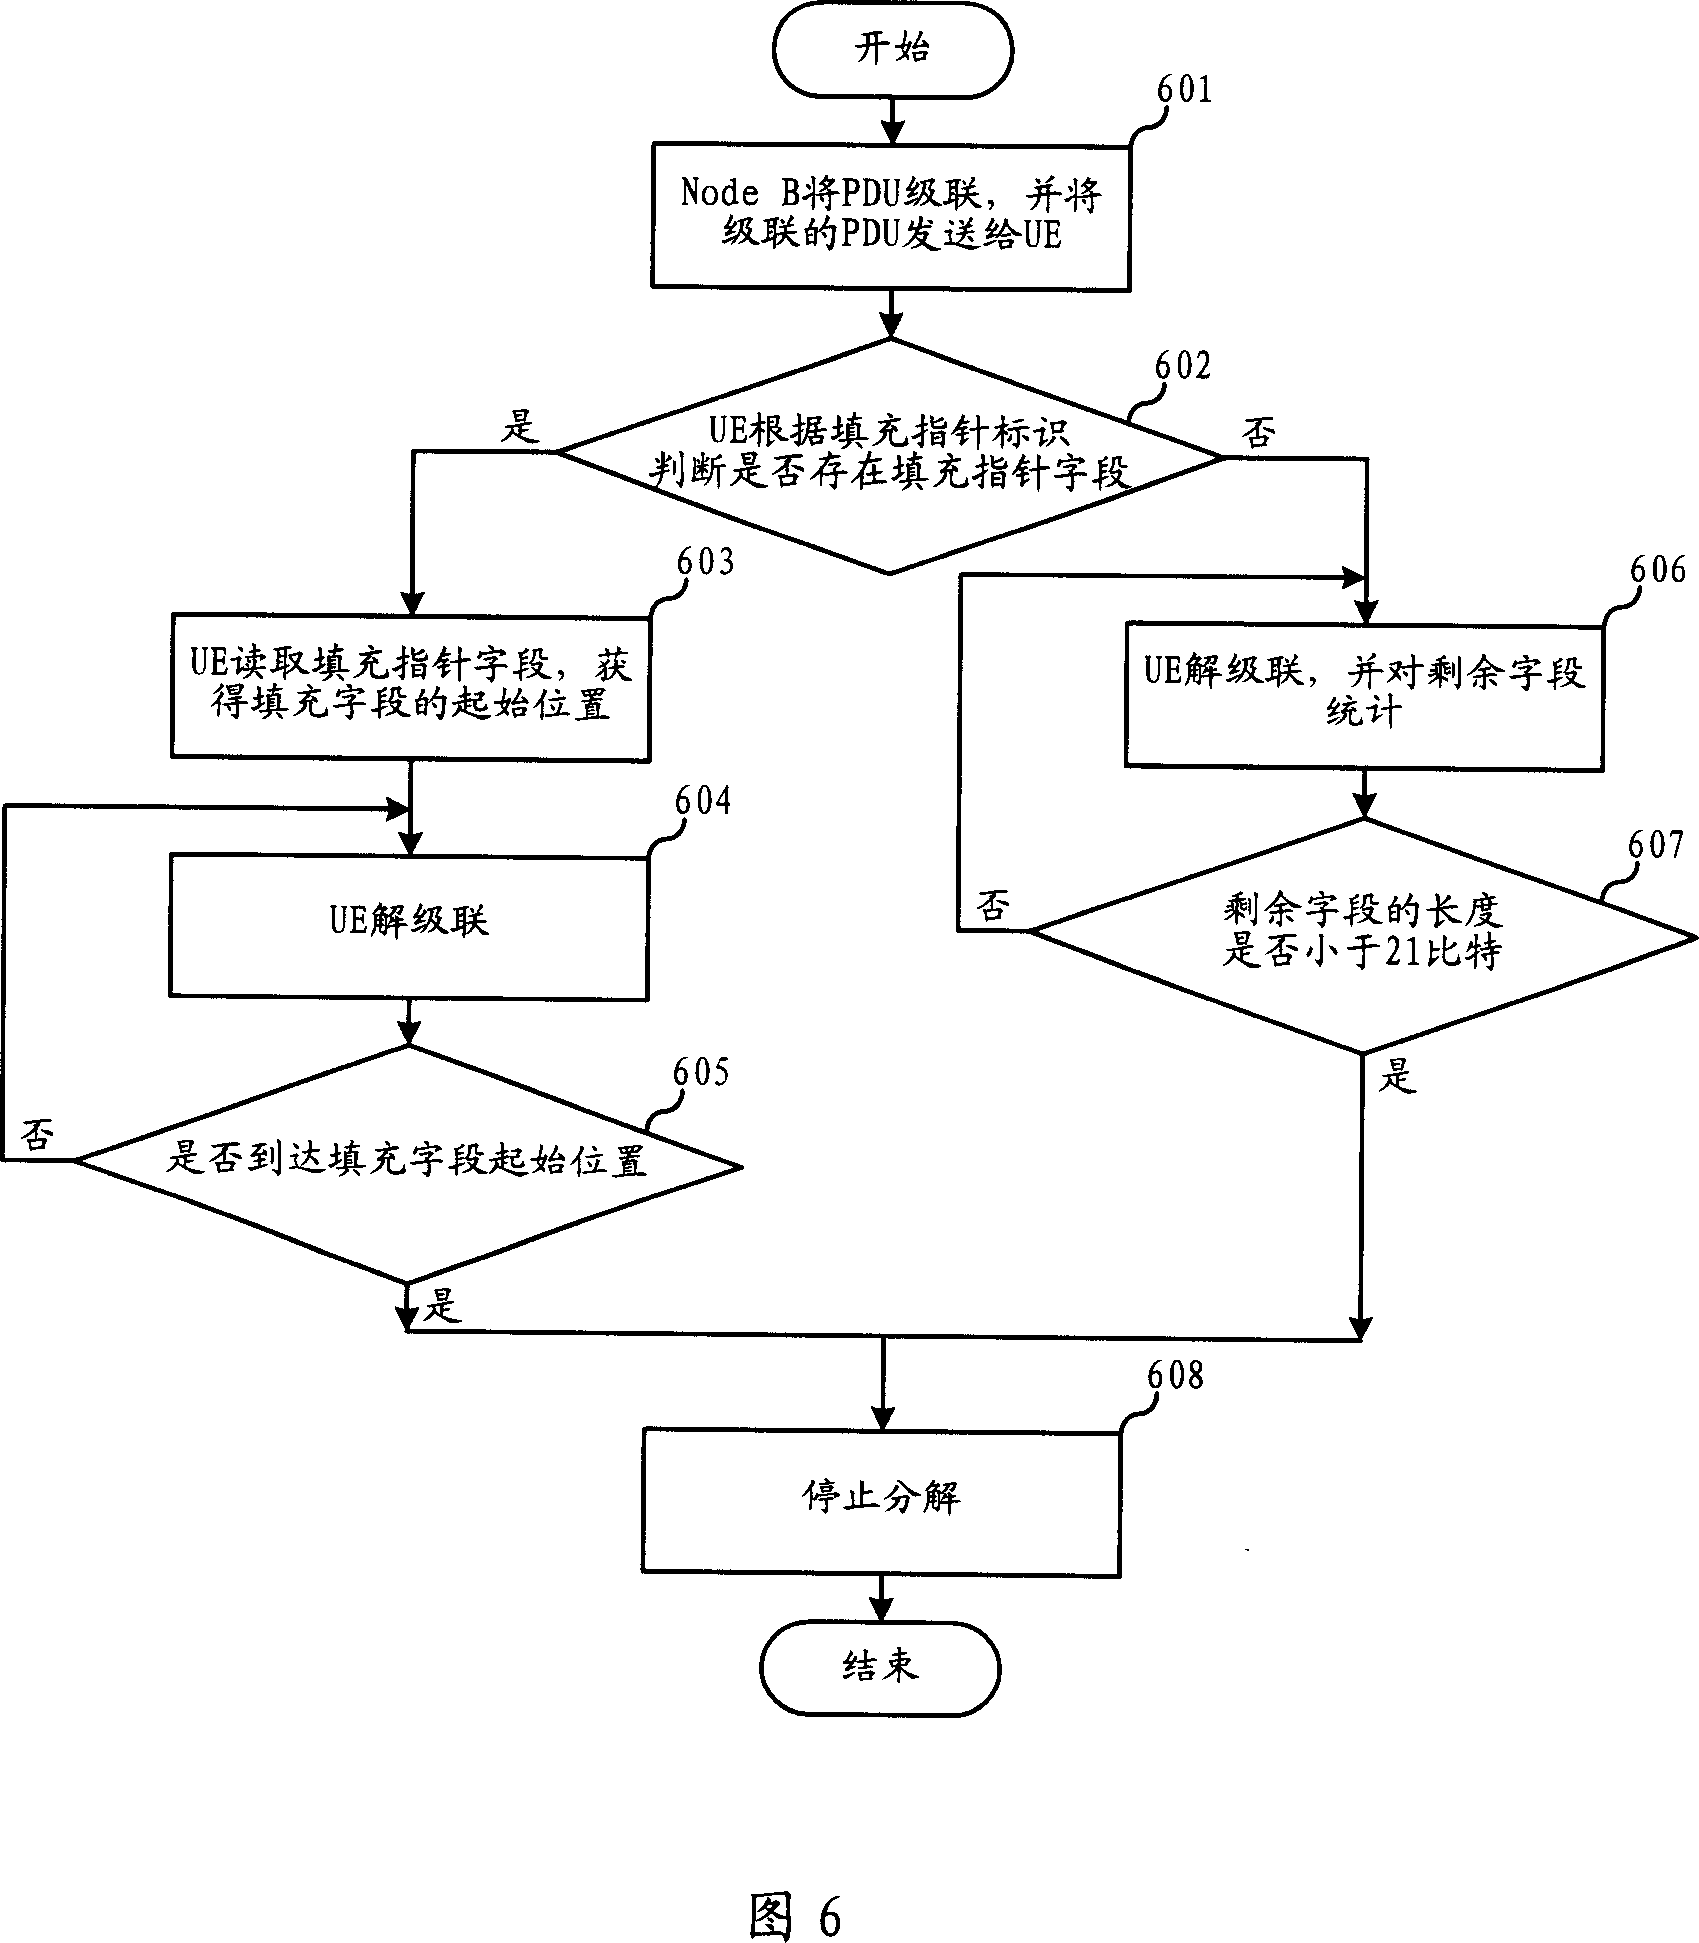 Multi-queue packet data transmission method and its system